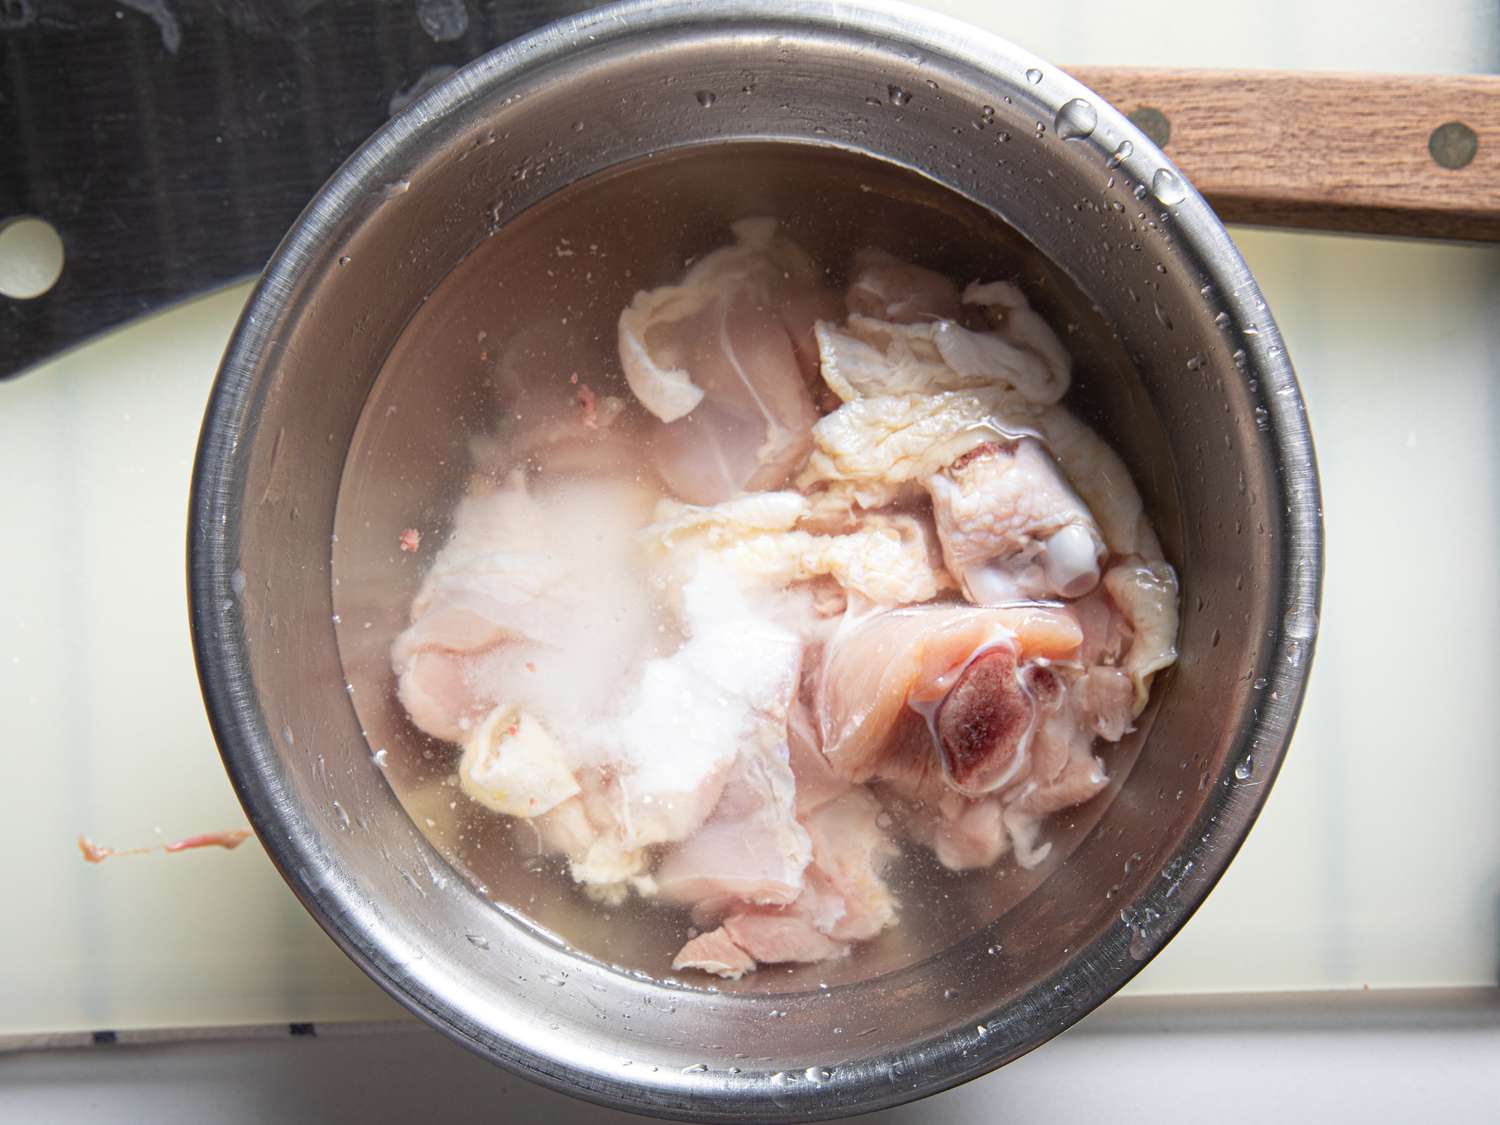 Chicken sitting in water in a stainless steel bowl.